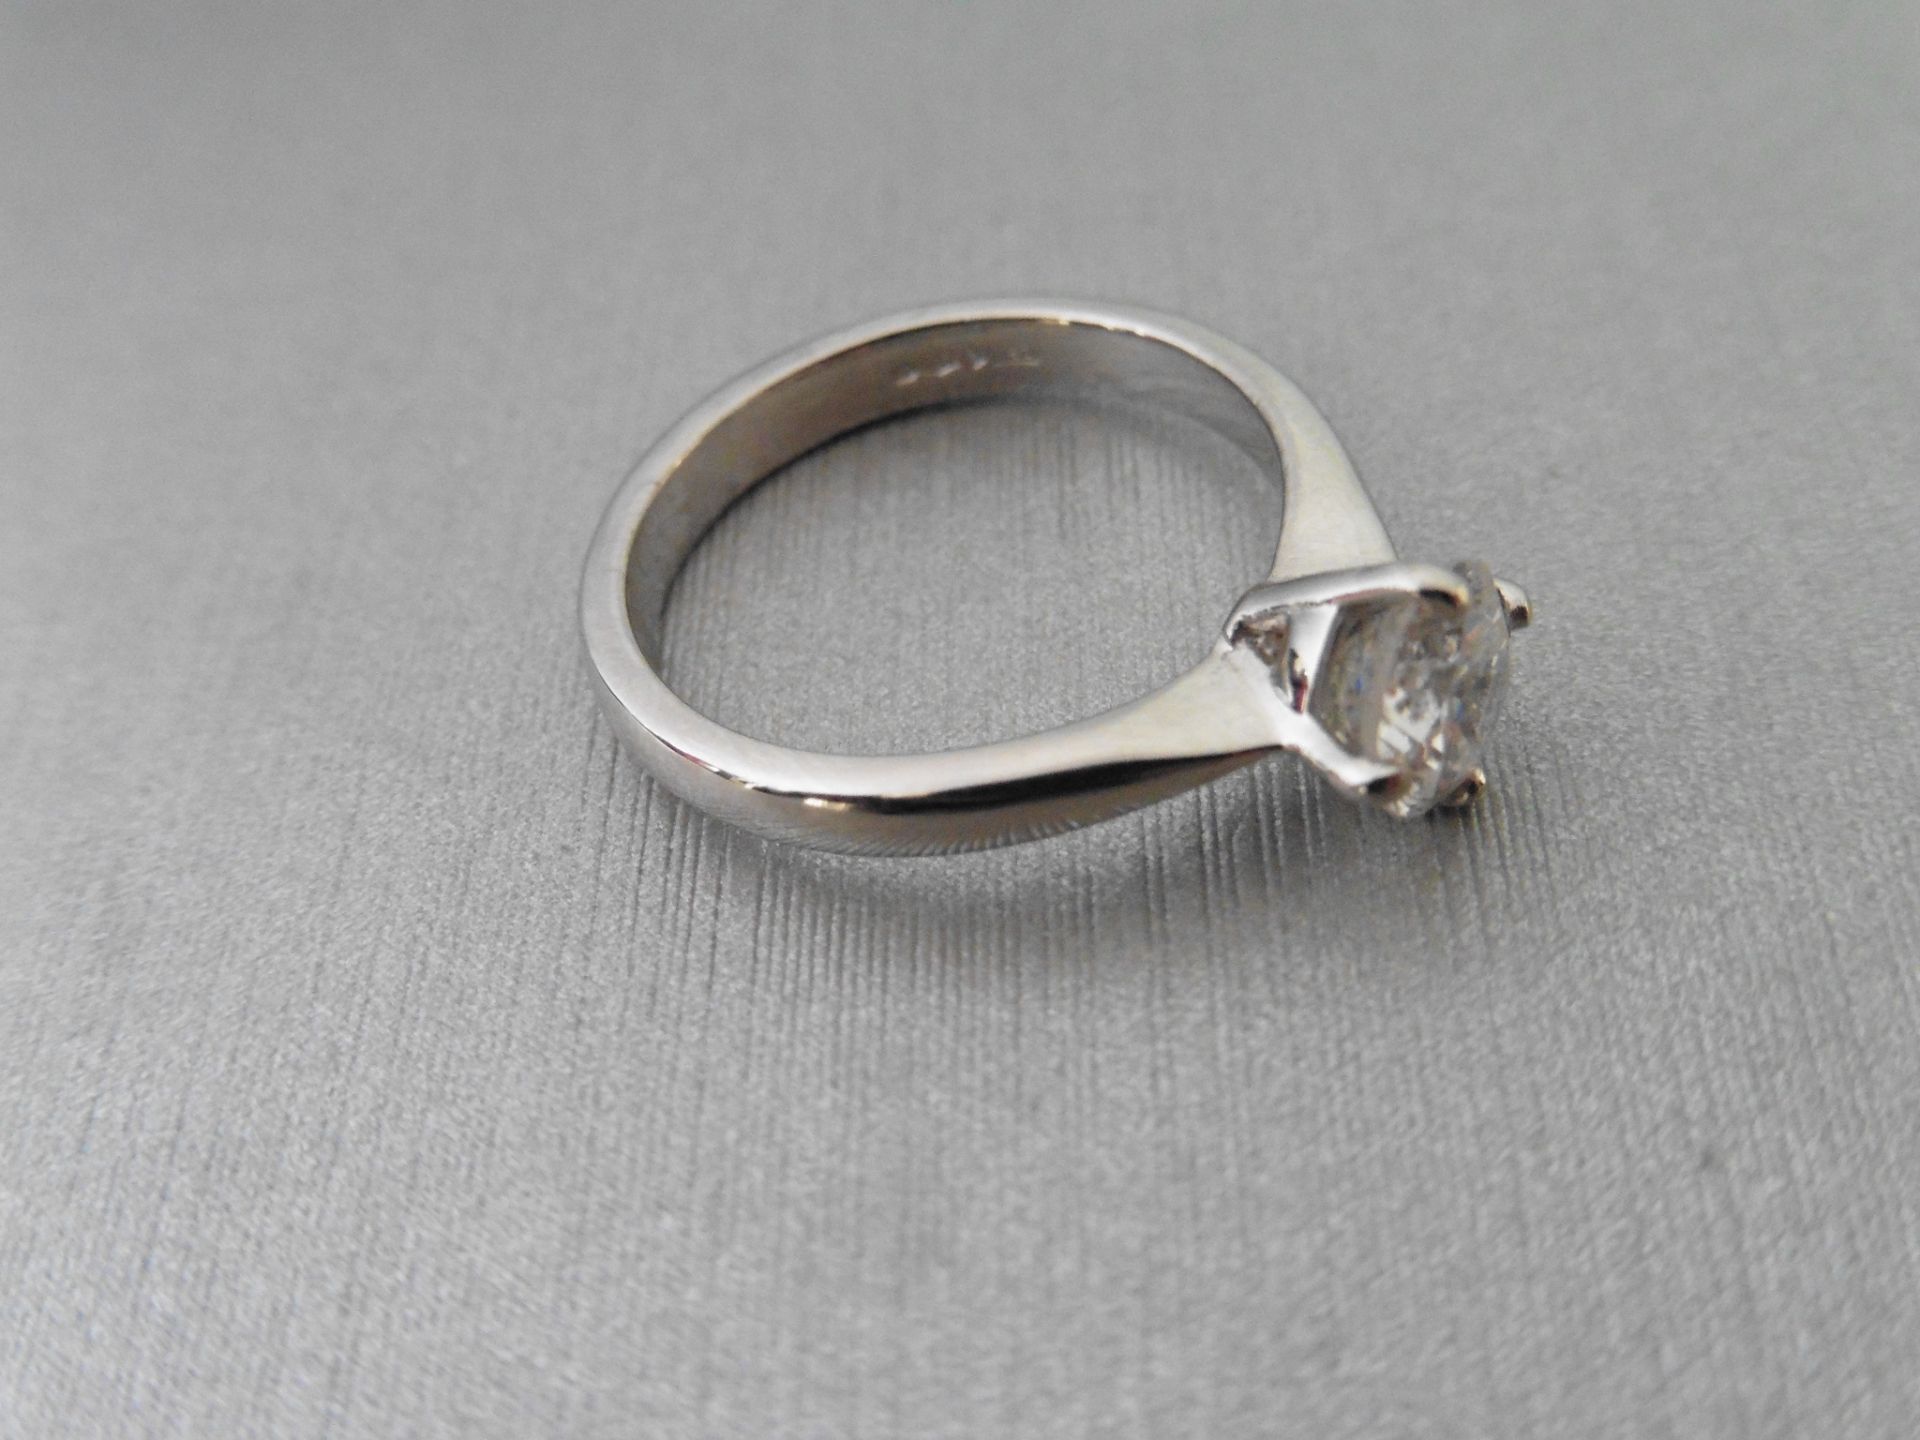 0.91ct Diamond solitaire ring with a brilliant cut diamond, H colour and Si1 clarity. Set in - Image 4 of 4